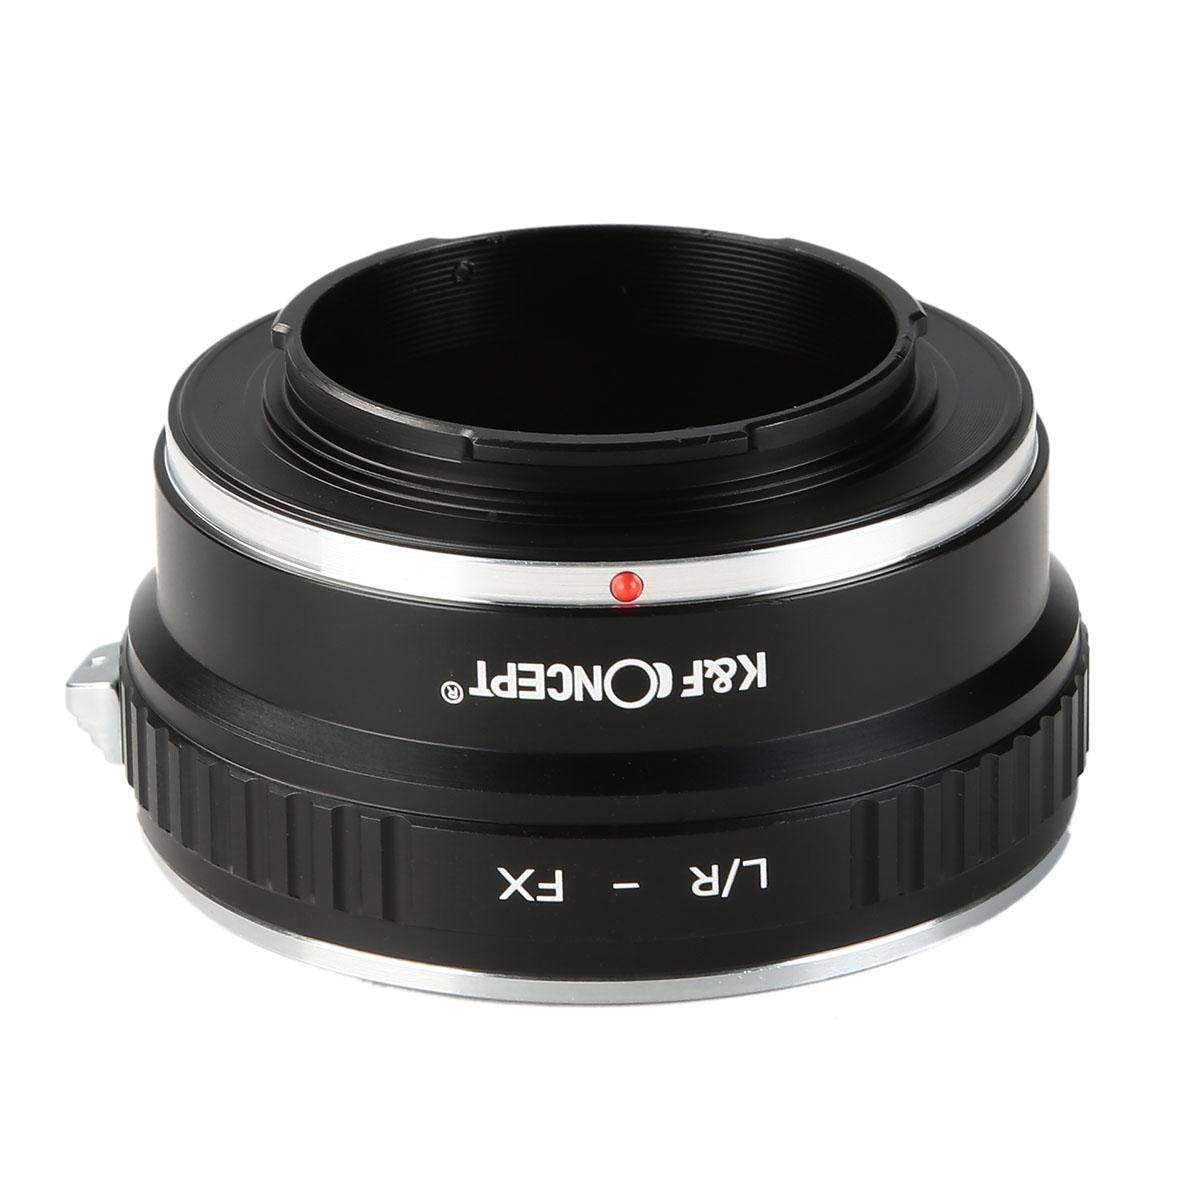 K&F Concept Lens Mount Adapter For Leica R Mount Lens to Fujifilm FX Mount Camera Adapter for Fujifilm FX Mount Camera L/R-FX 